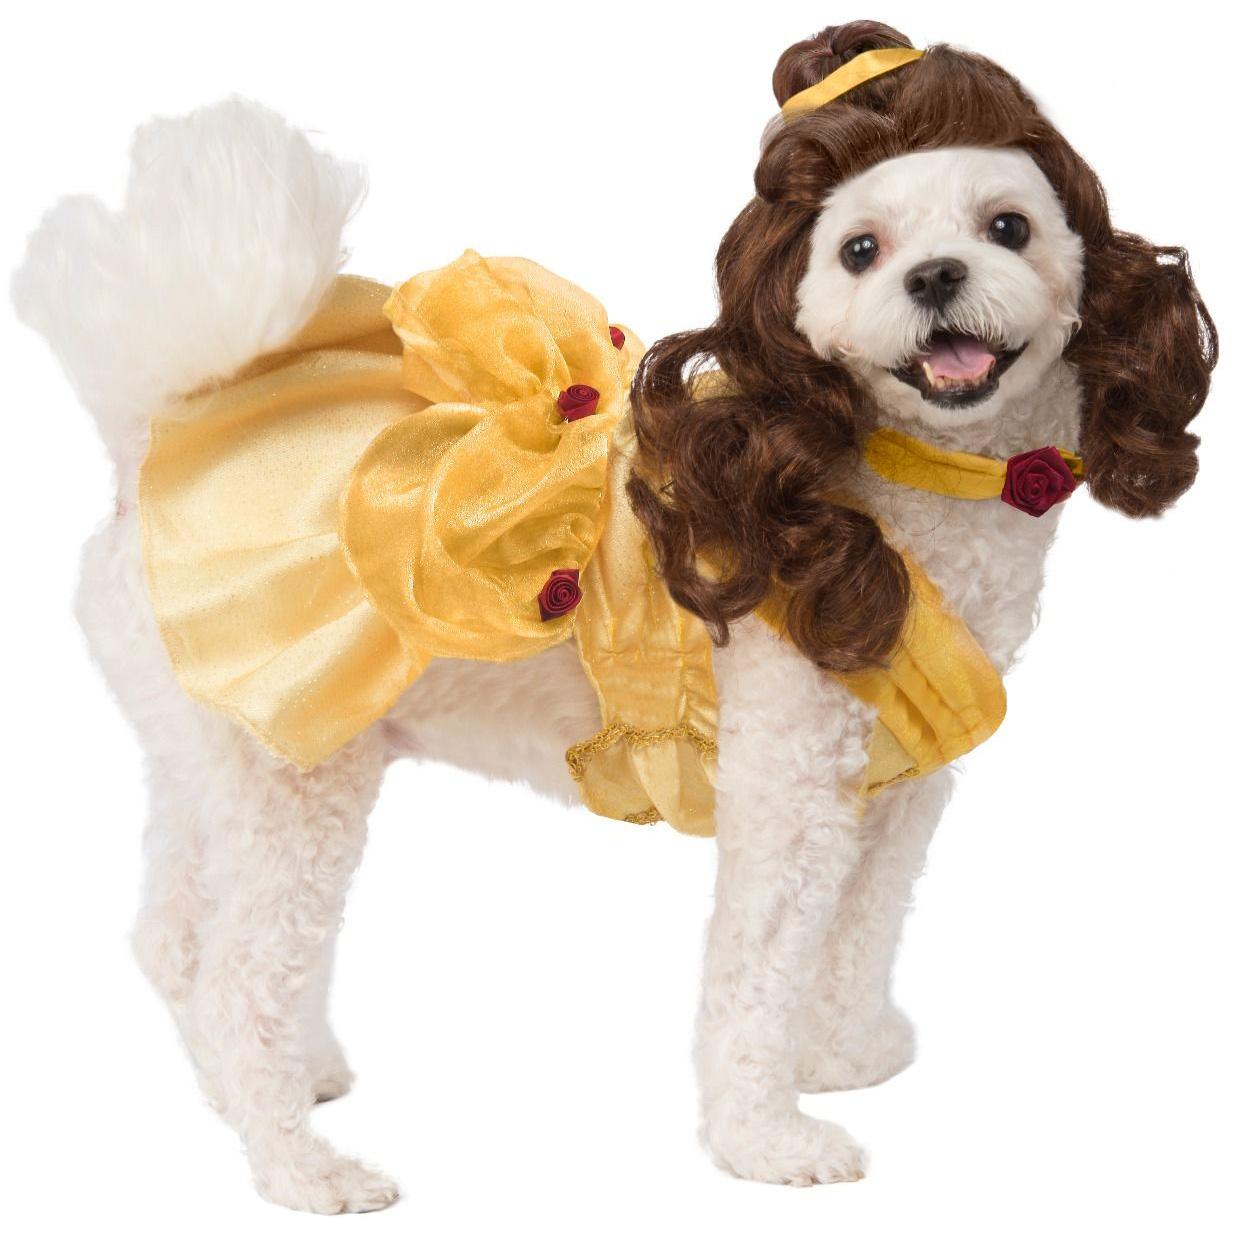 Disney Belle Beauty and the Beast Dog Costume by Rubies